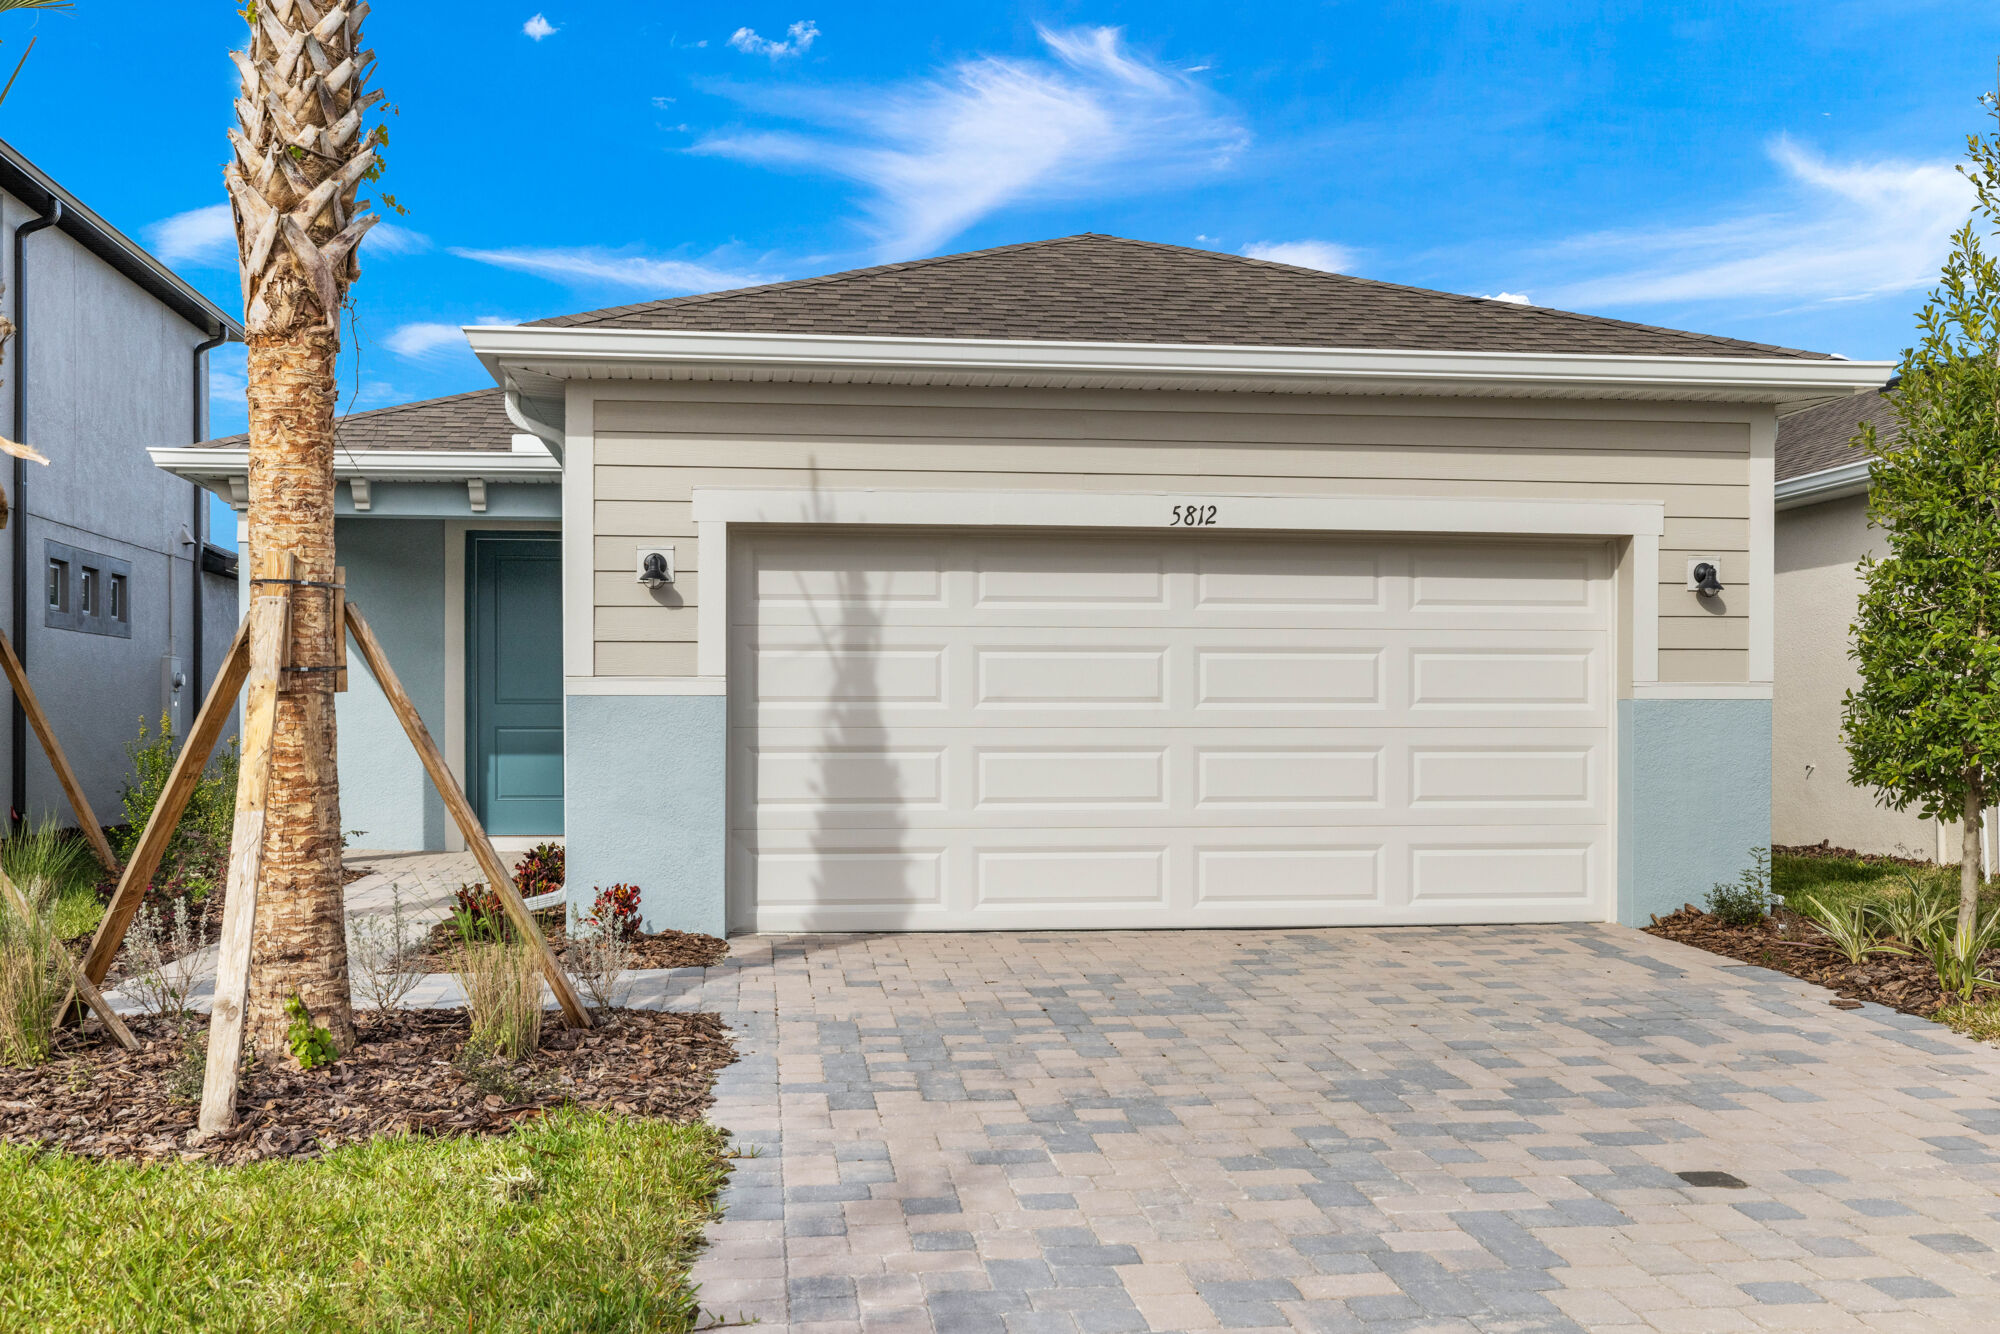 Single family 2 bedroom, 2 bathroom, 2-car garage home with a study. plank style tile flooring, island with breakfast bar, stainless steel appliances including the refrigerator, triple glass sliders, screened lanai, pavers, glass enclosed showers, 